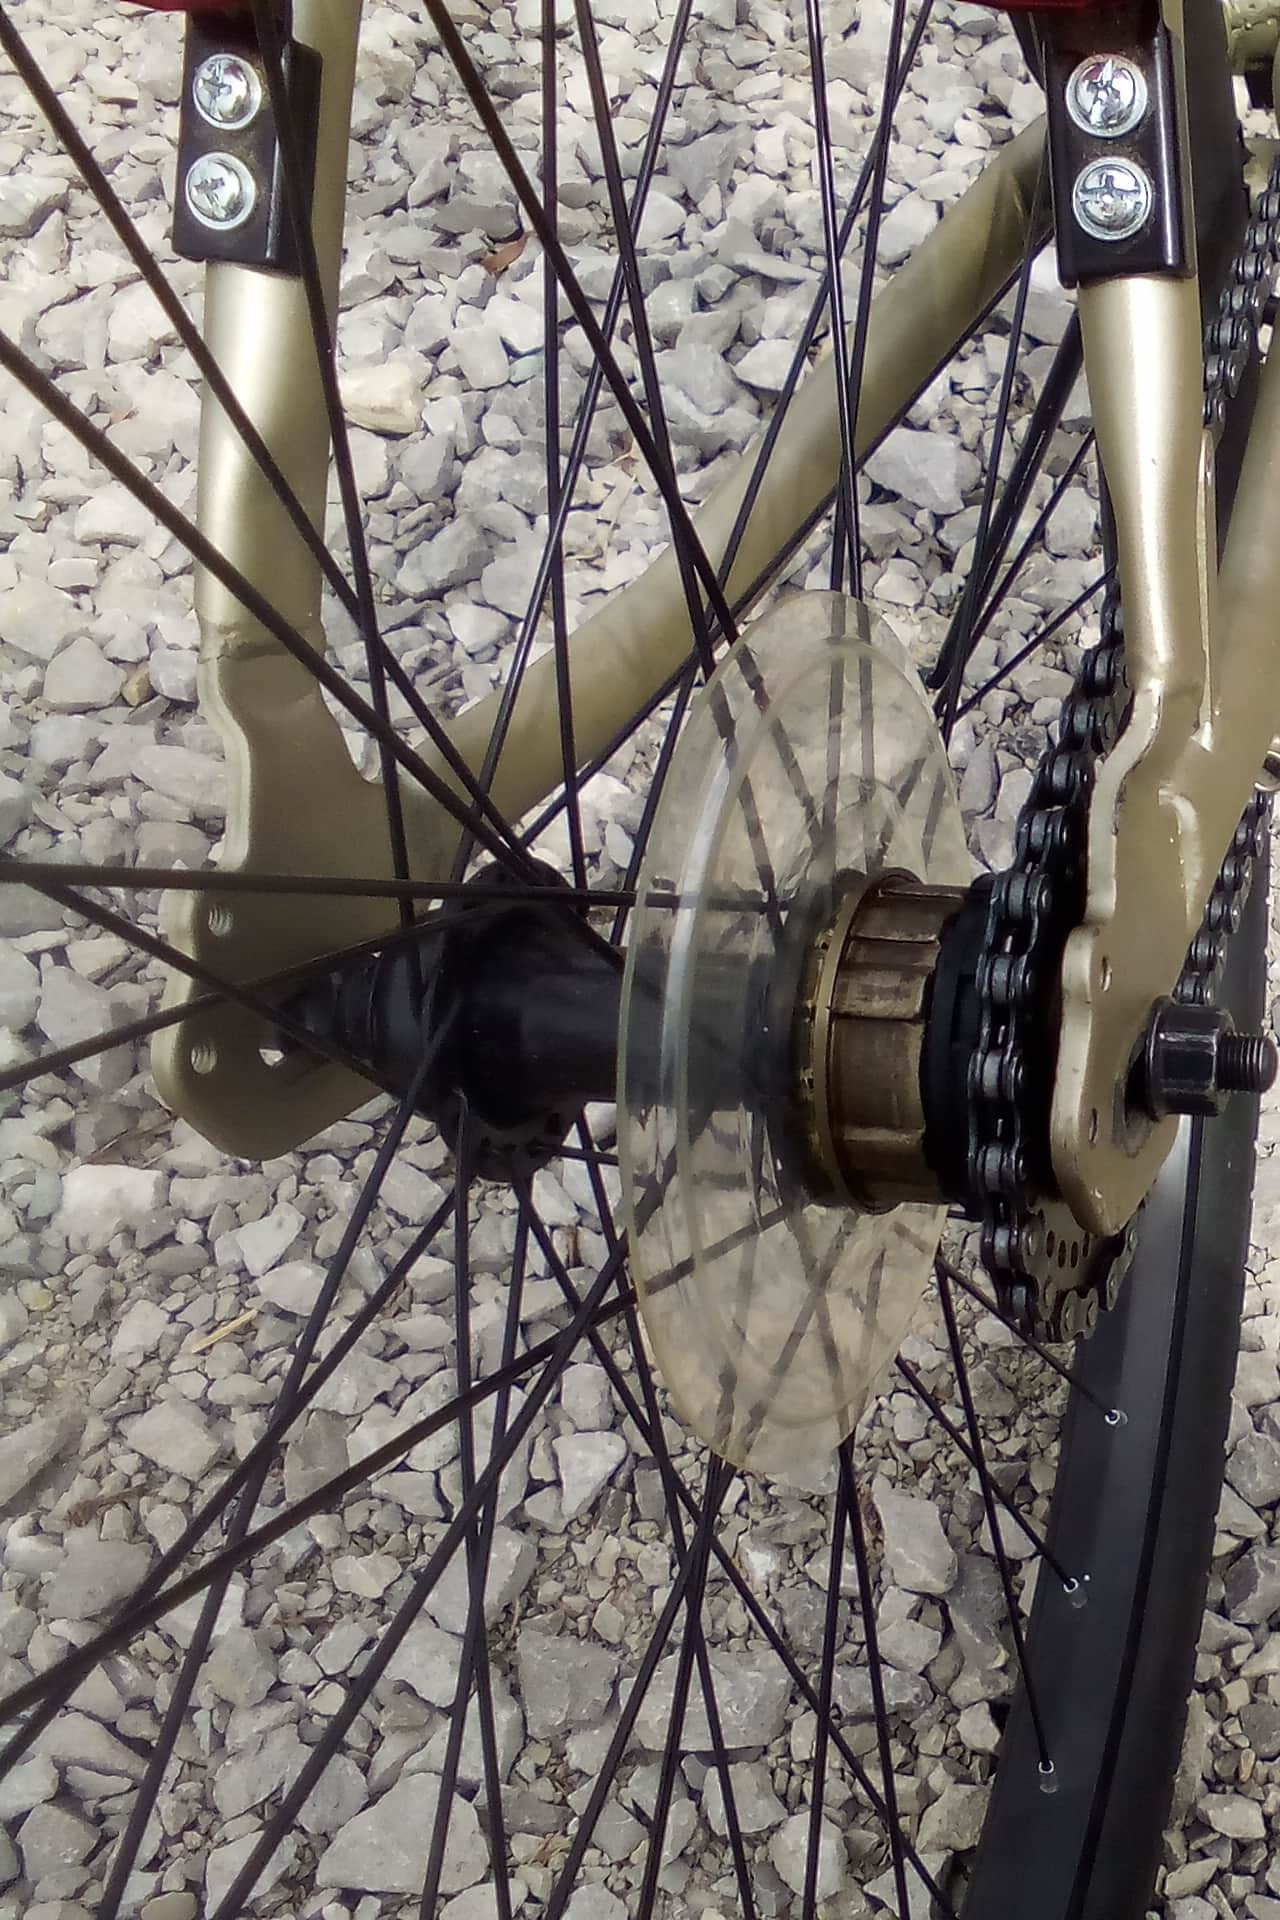 A shot of a bicycle chain from the rear focused on a butchered freewheel with several spacers holding a single gear in place